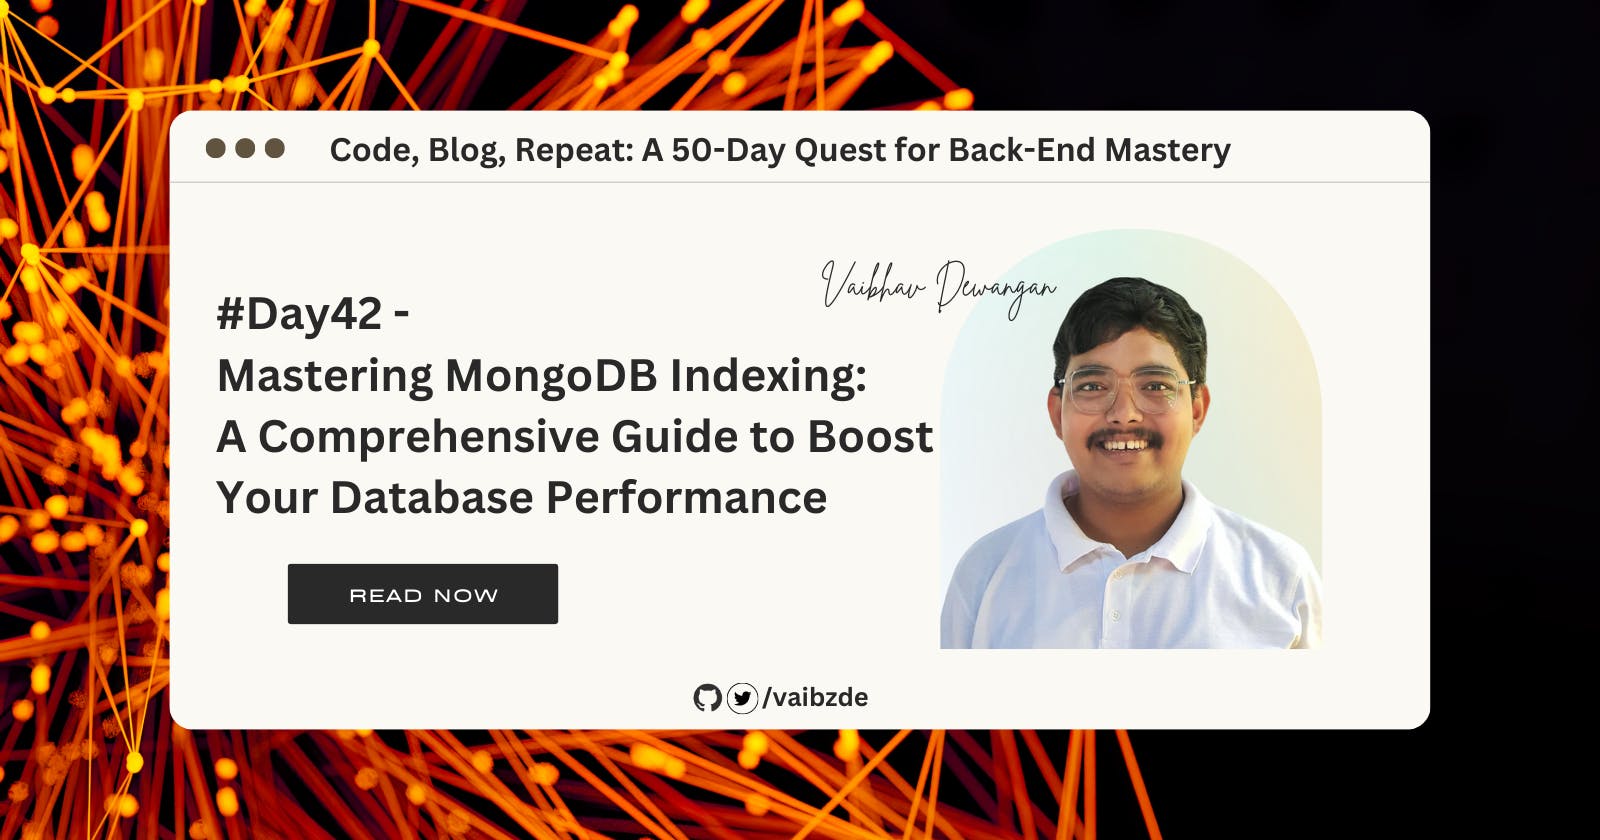 #Day42 - Mastering MongoDB Indexing: A Comprehensive Guide to Boost Your Database Performance